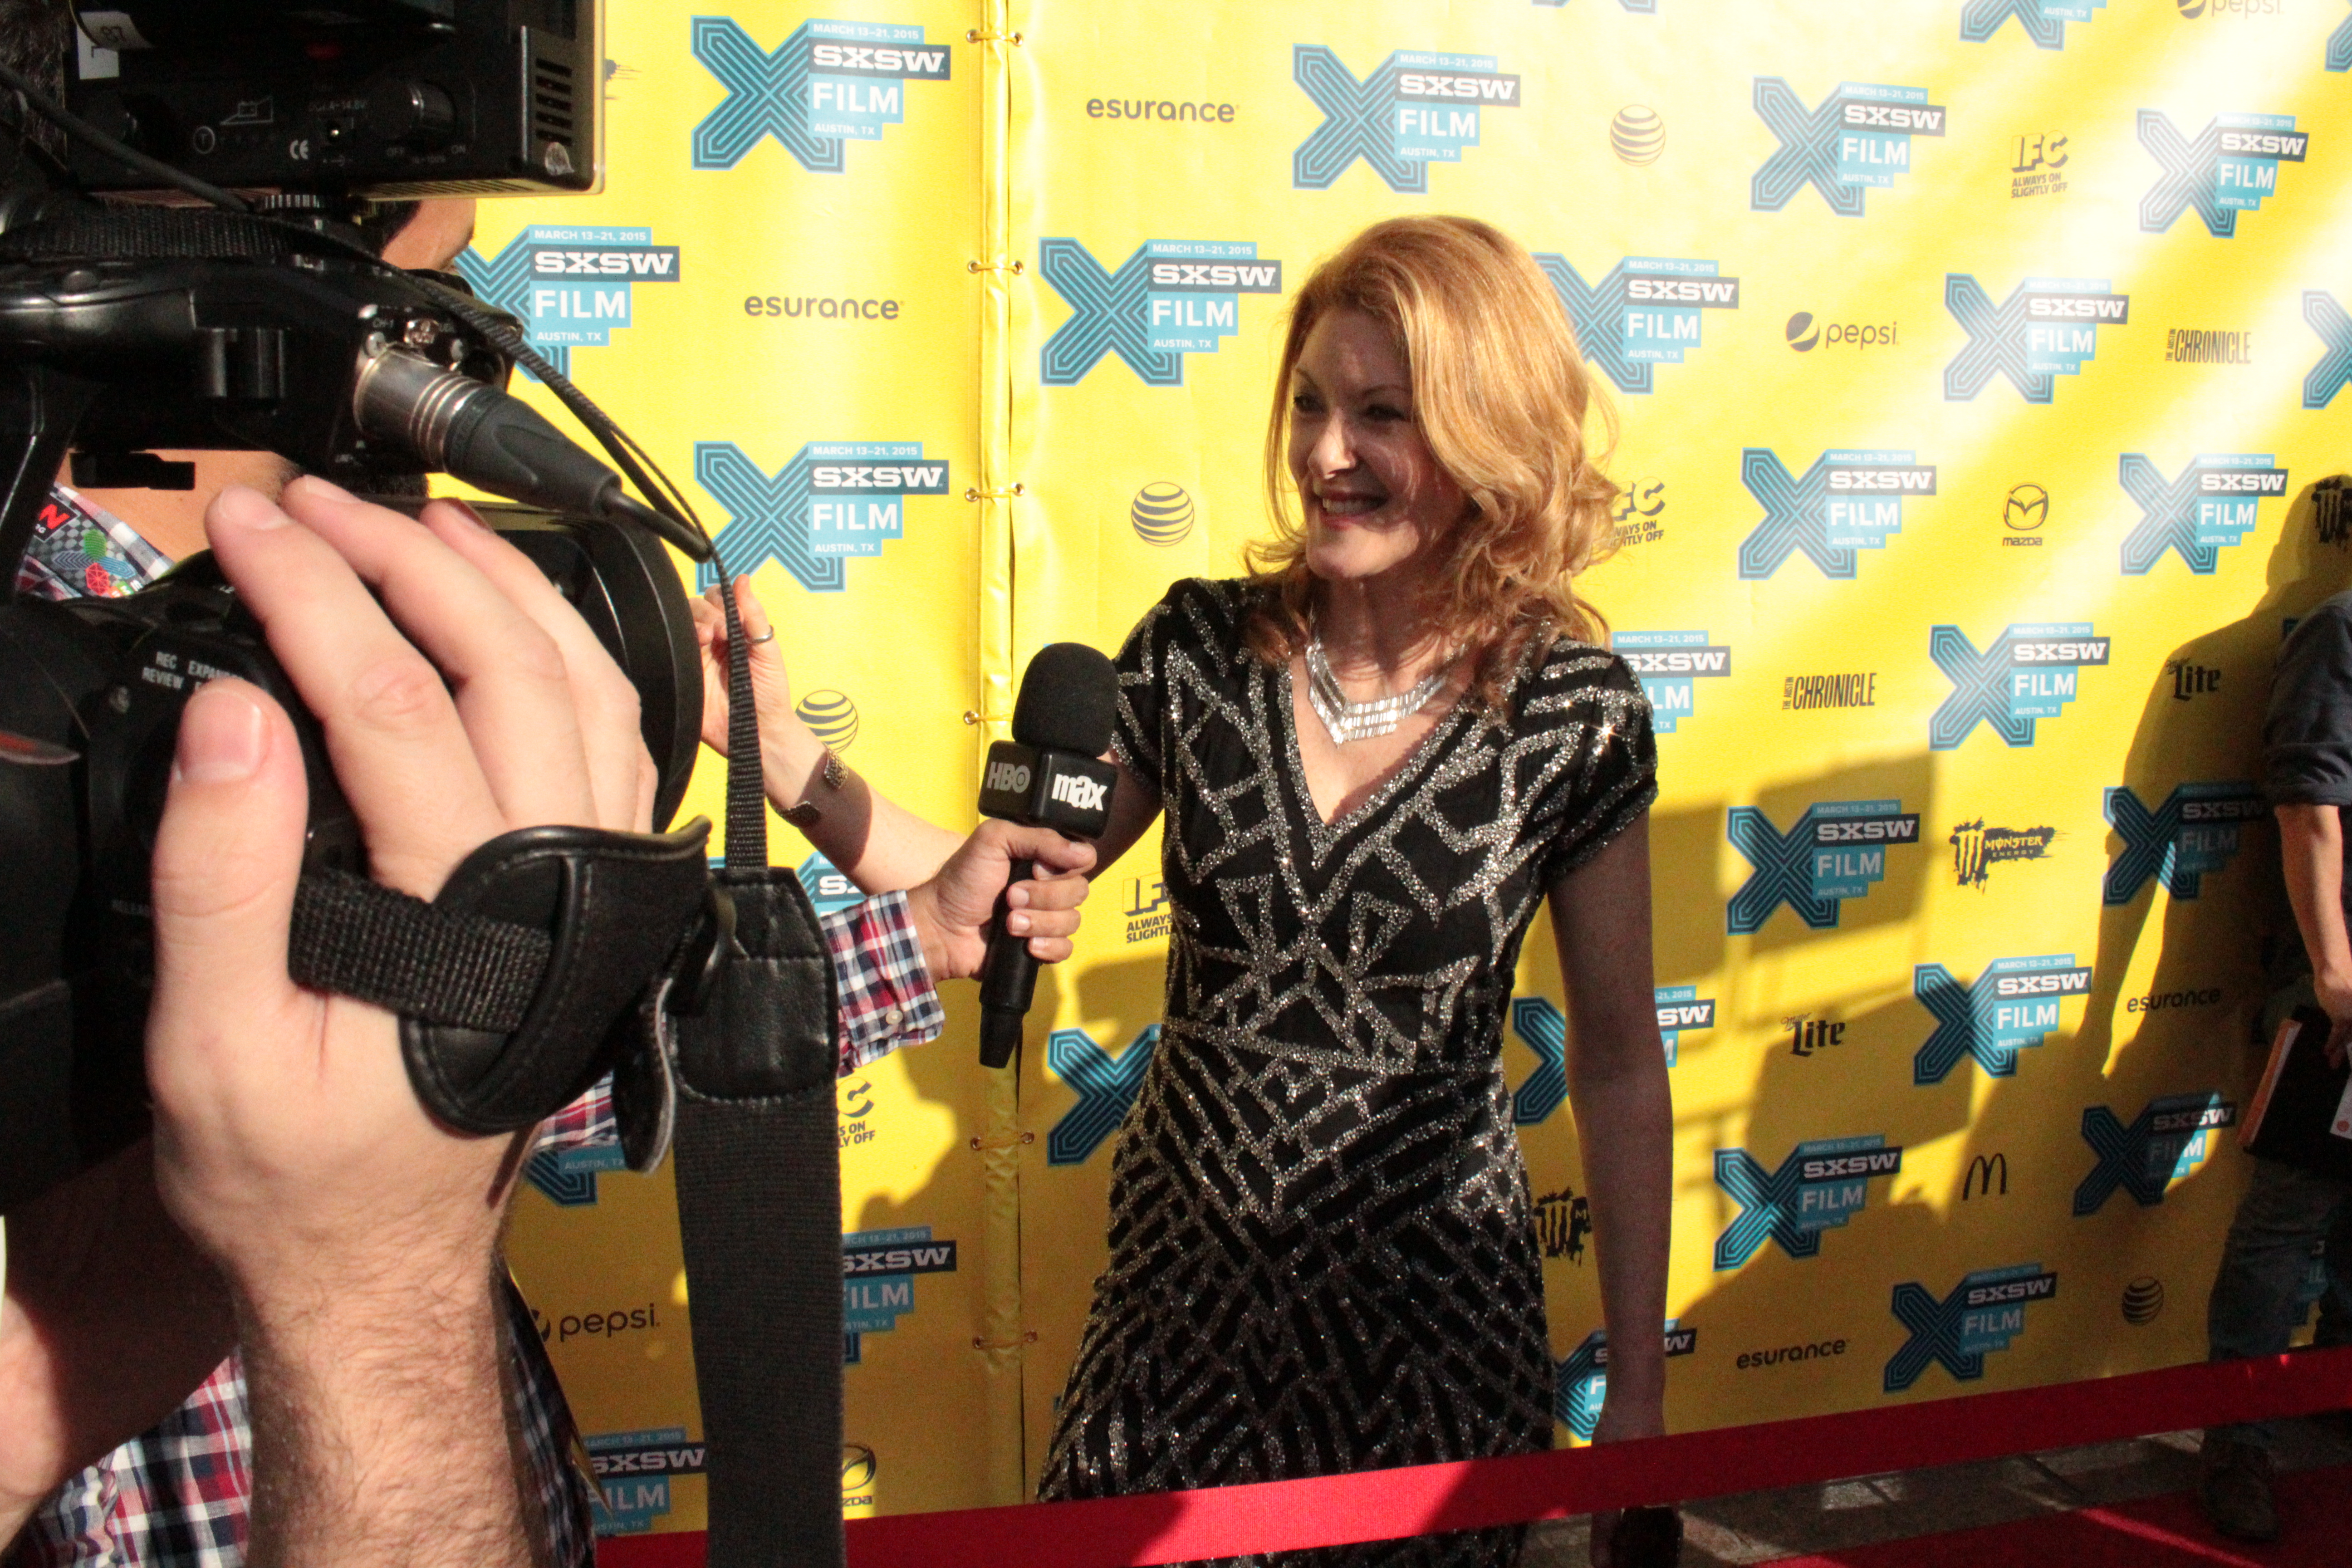 Ondi Timoner on the red carpet at SXSW for the premiere of here new film BRAND: A Second Coming